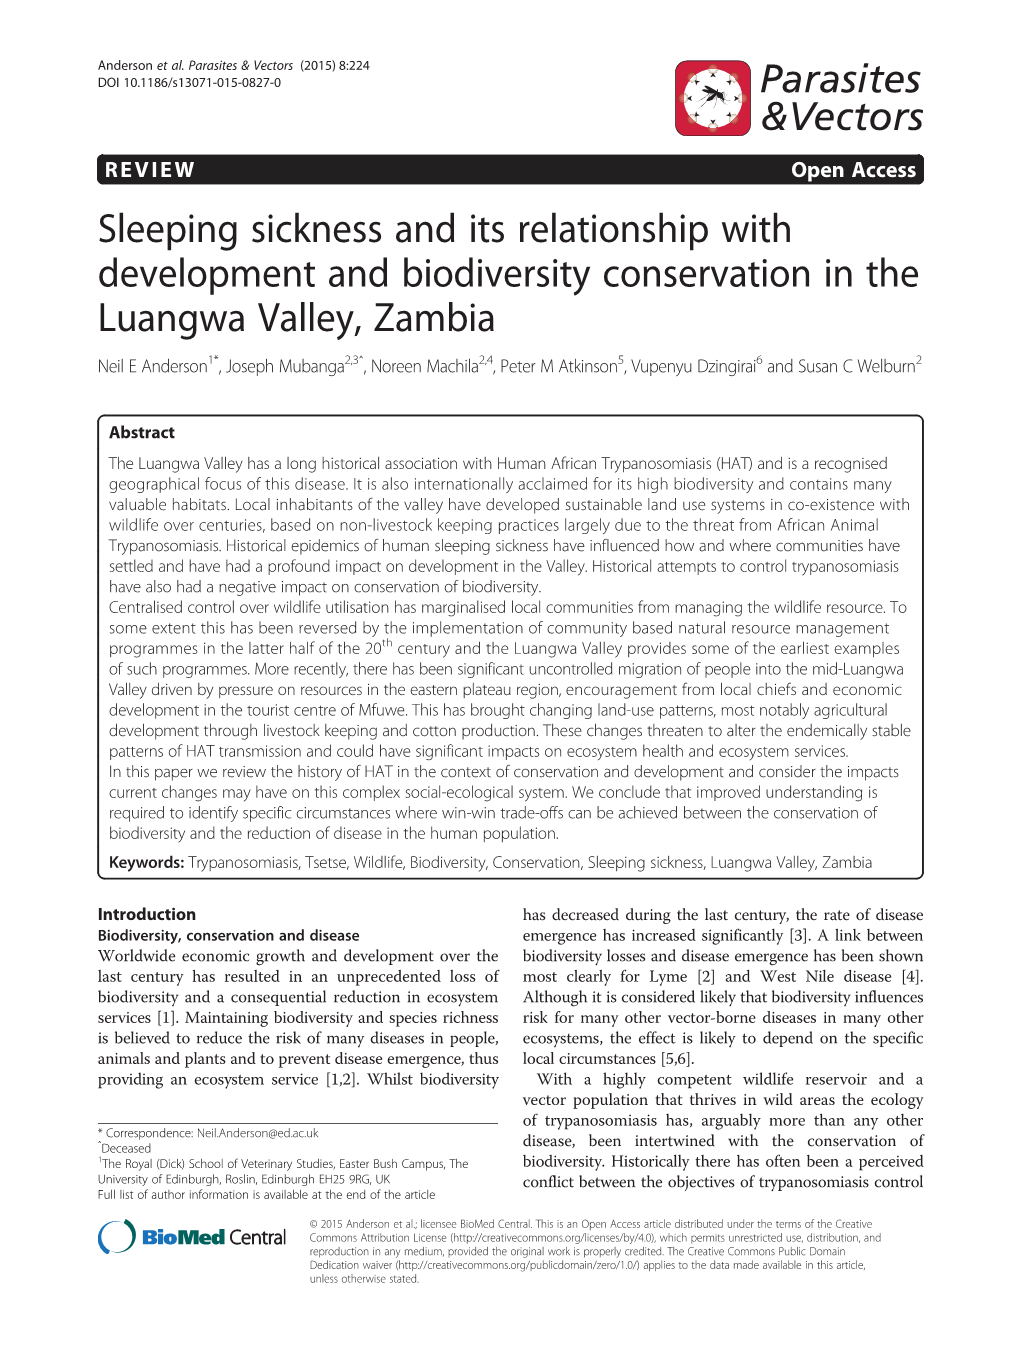 Sleeping Sickness and Its Relationship with Development and Biodiversity